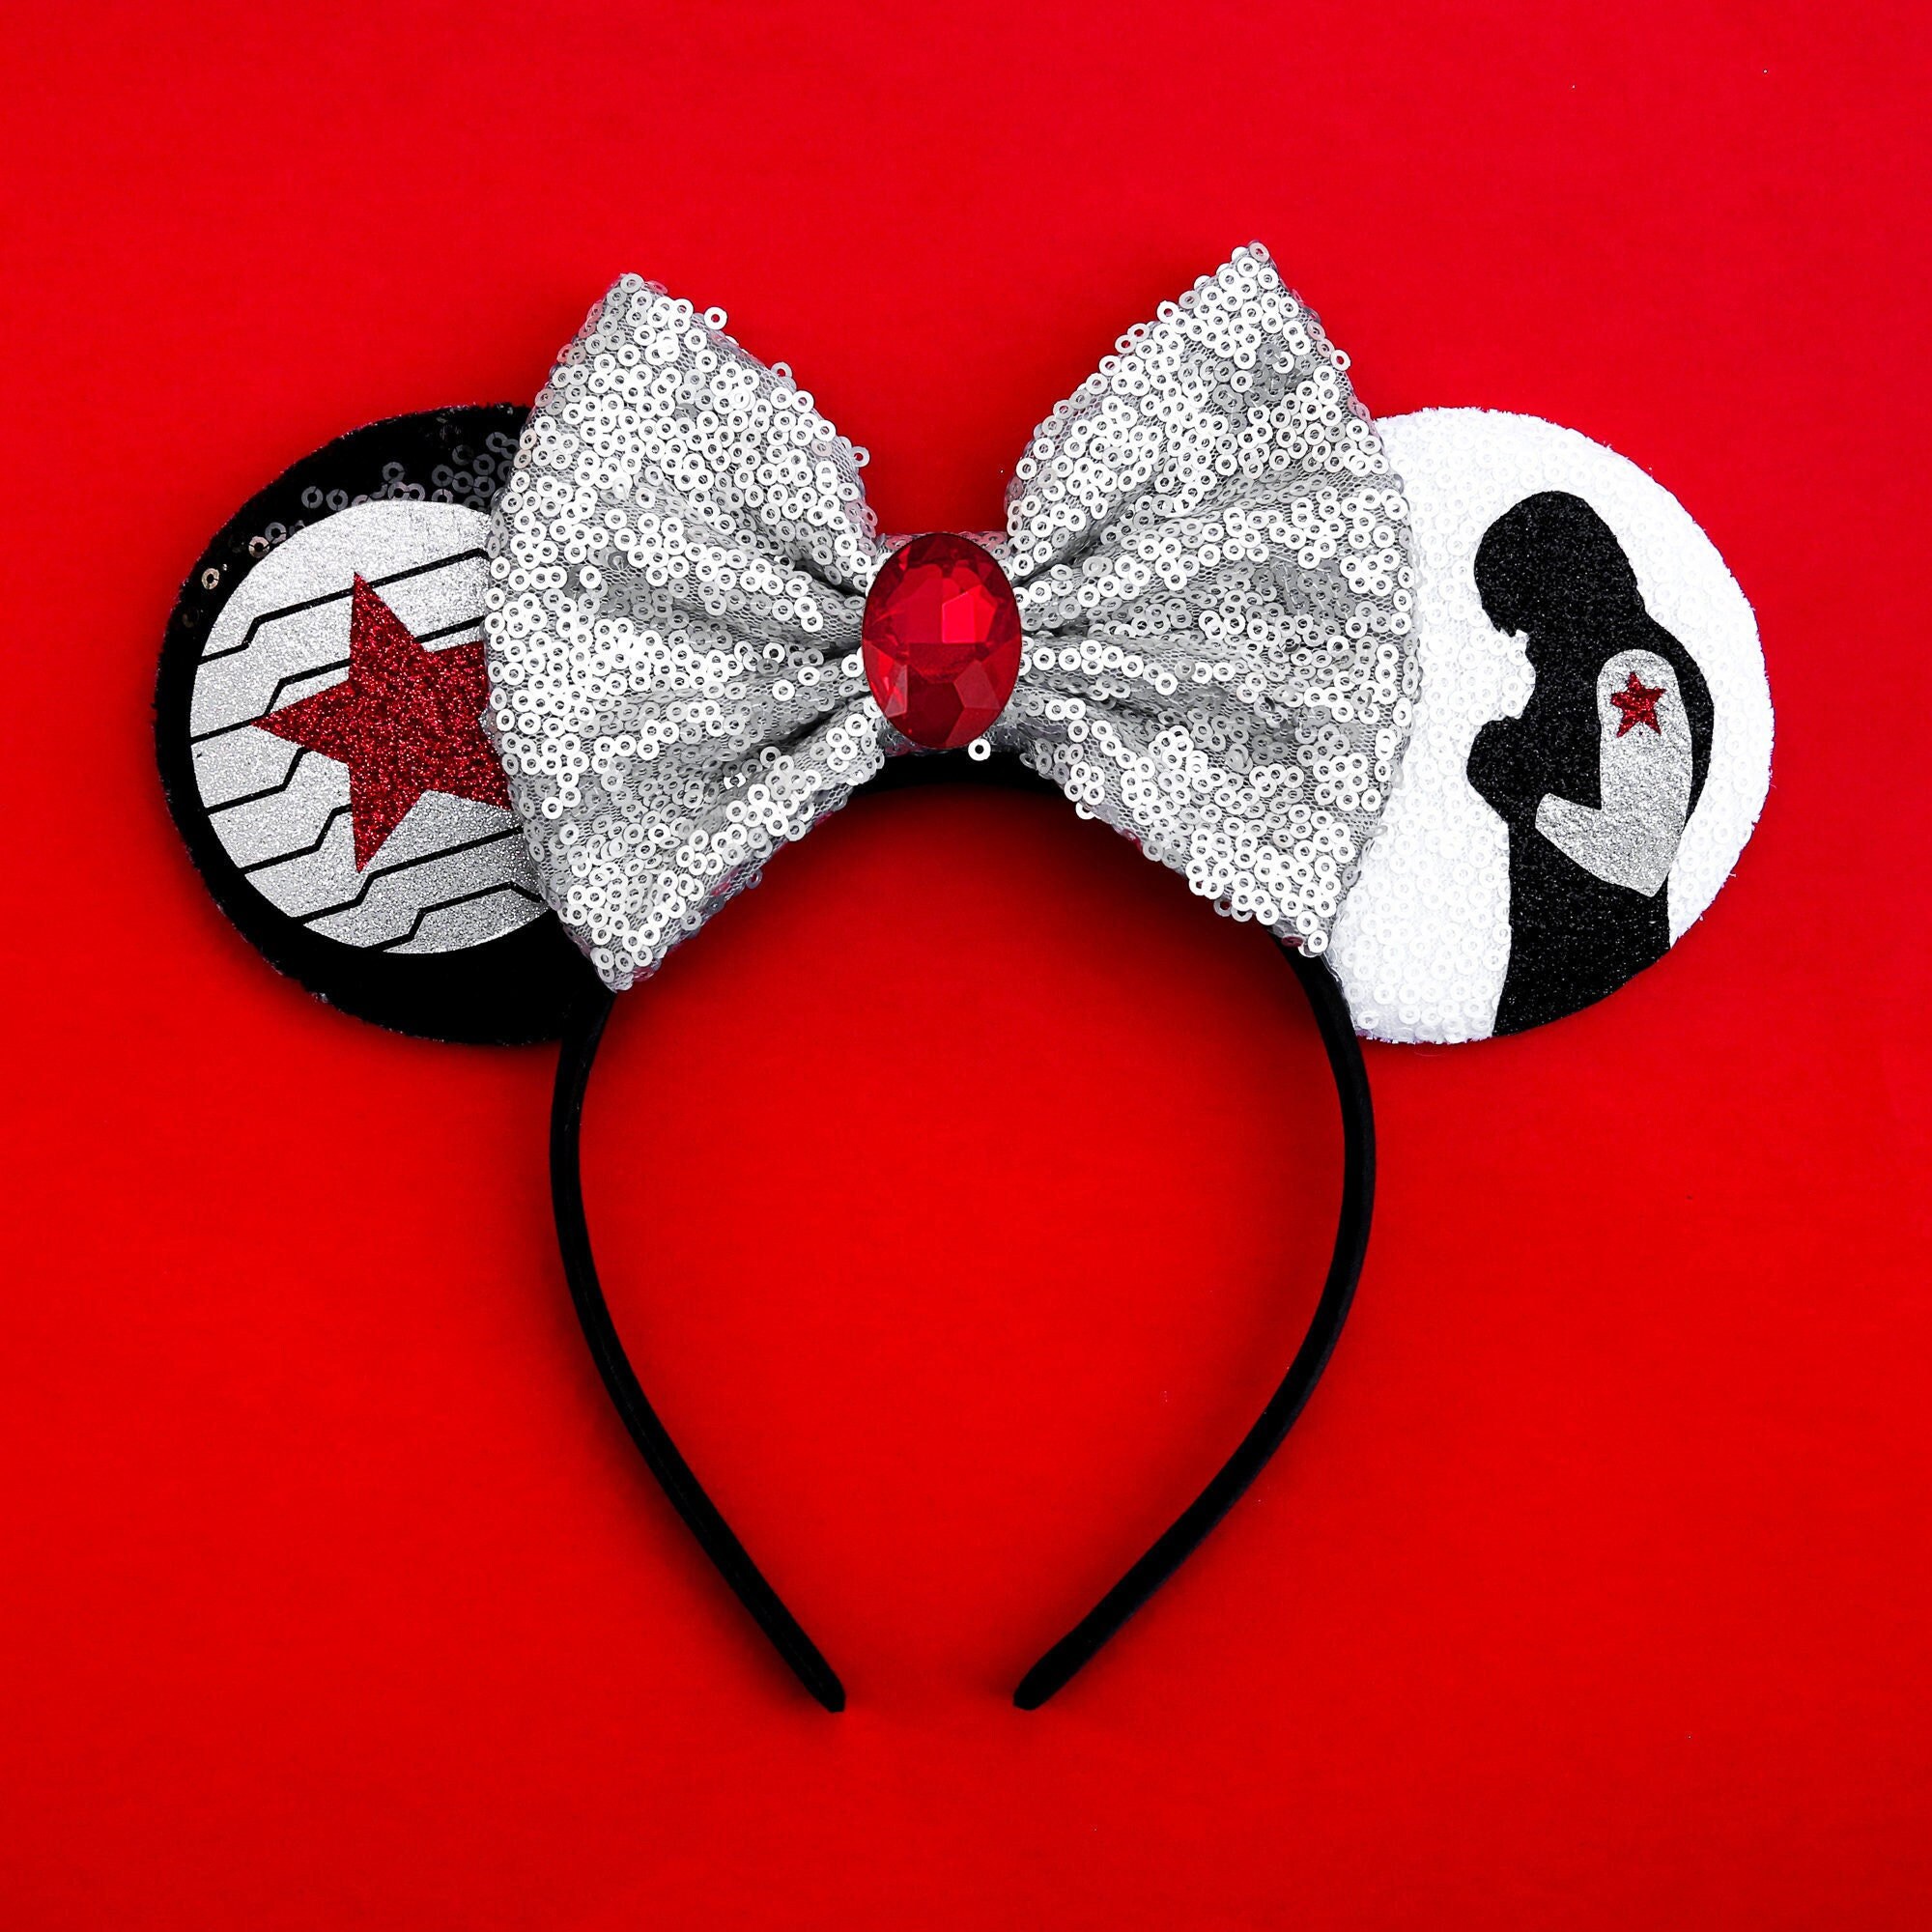 Personalized Mouse Ears Kids Mouse Ears Vinyl Mouse Ears Custom Mouse Ears Kissing Mickey and Minnie Inspired Mouse Ears